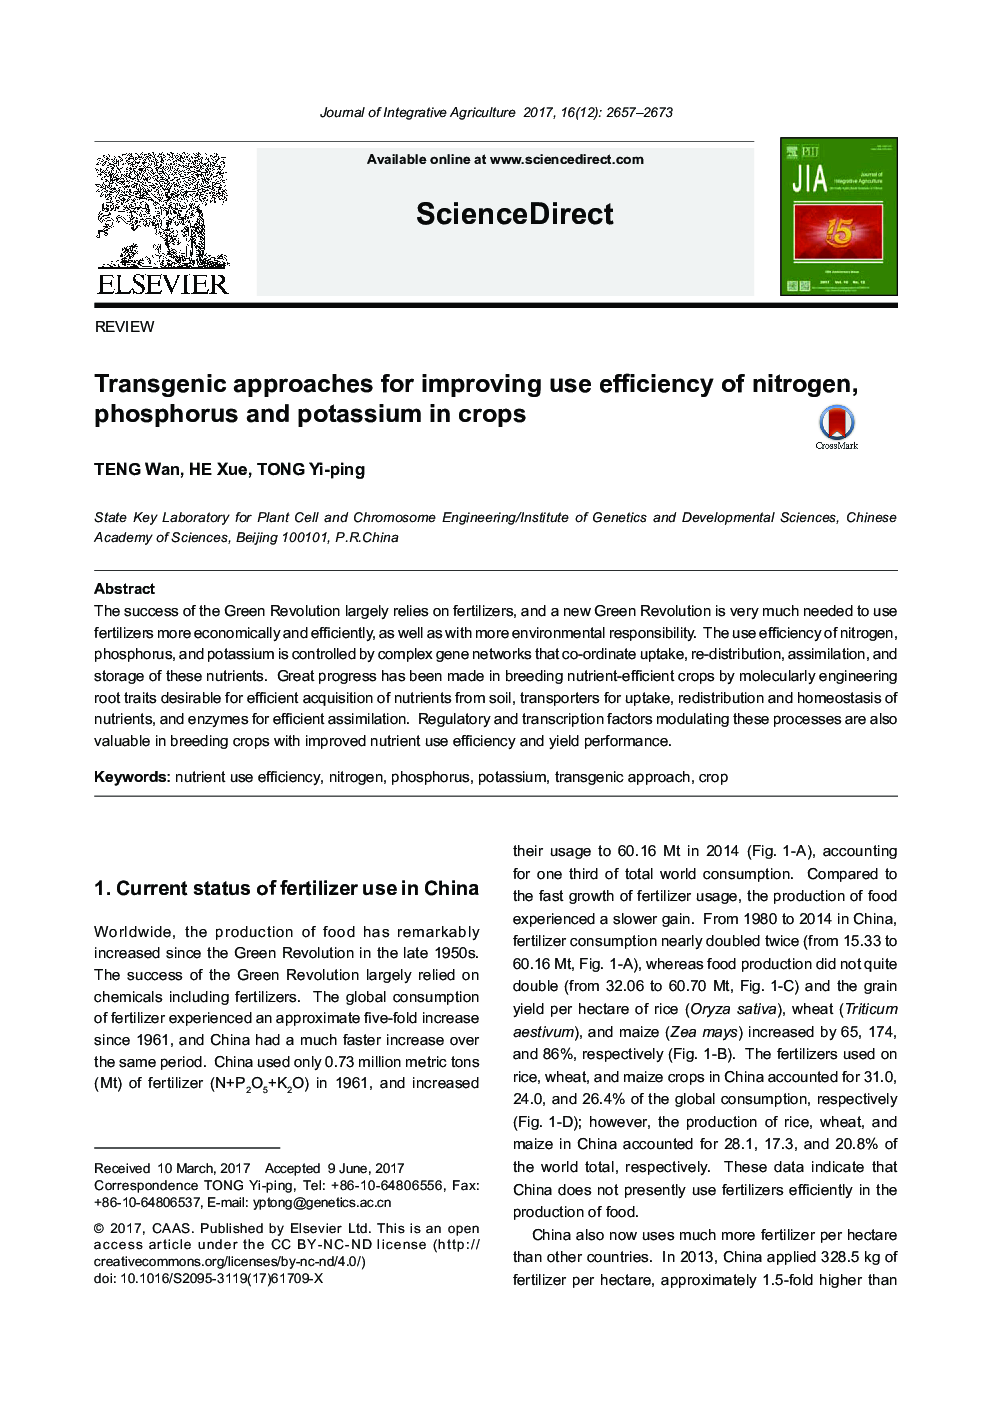 Transgenic approaches for improving use efficiency of nitrogen, phosphorus and potassium in crops